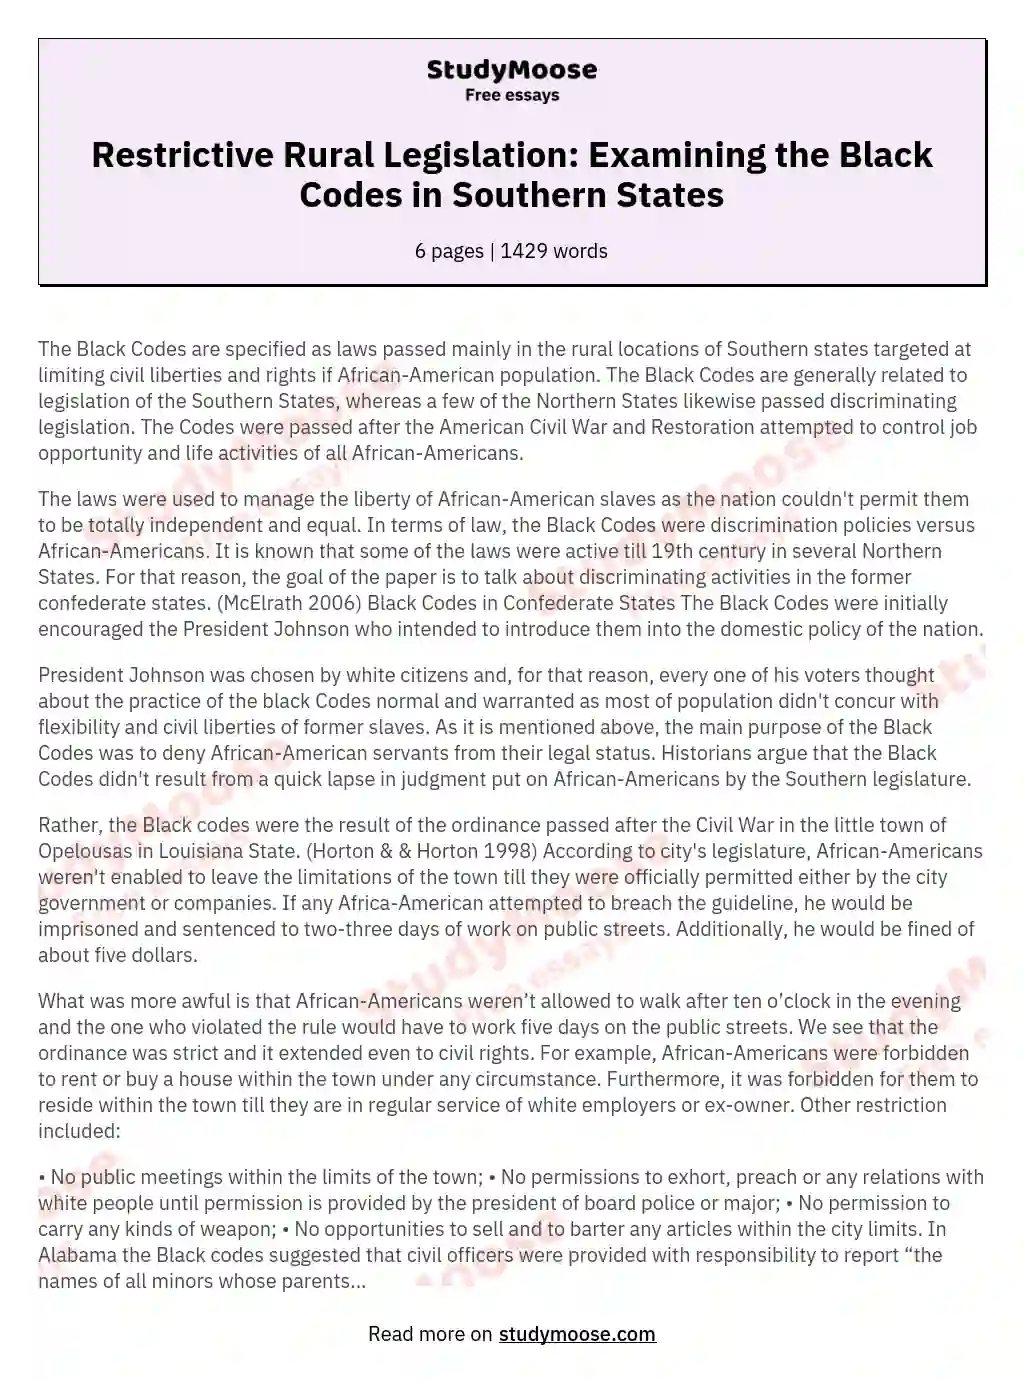 Restrictive Rural Legislation: Examining the Black Codes in Southern States essay